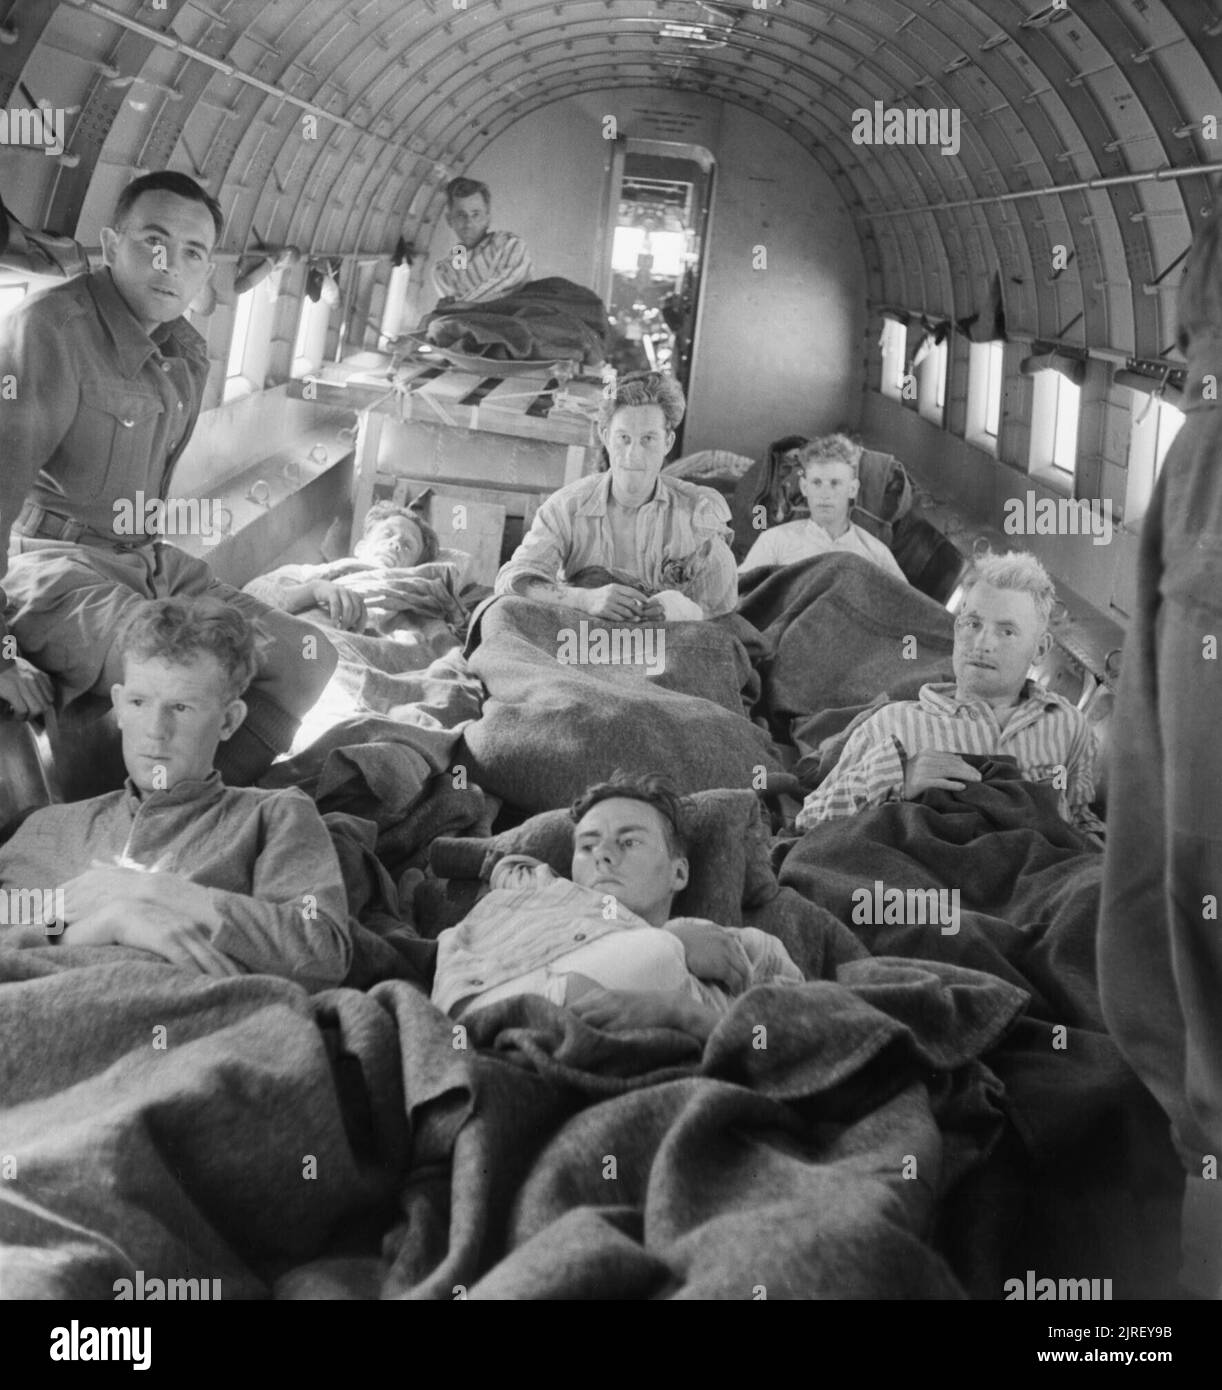 Royal Air Force Operations in the Middle East and North Africa, 1939-1943. Battle casualties loaded into a Lockheed Hudson Mark VI of No. 216 Group RAF at Castel Benito, Libya, for evacuation to hospitals in Egypt. Stock Photo